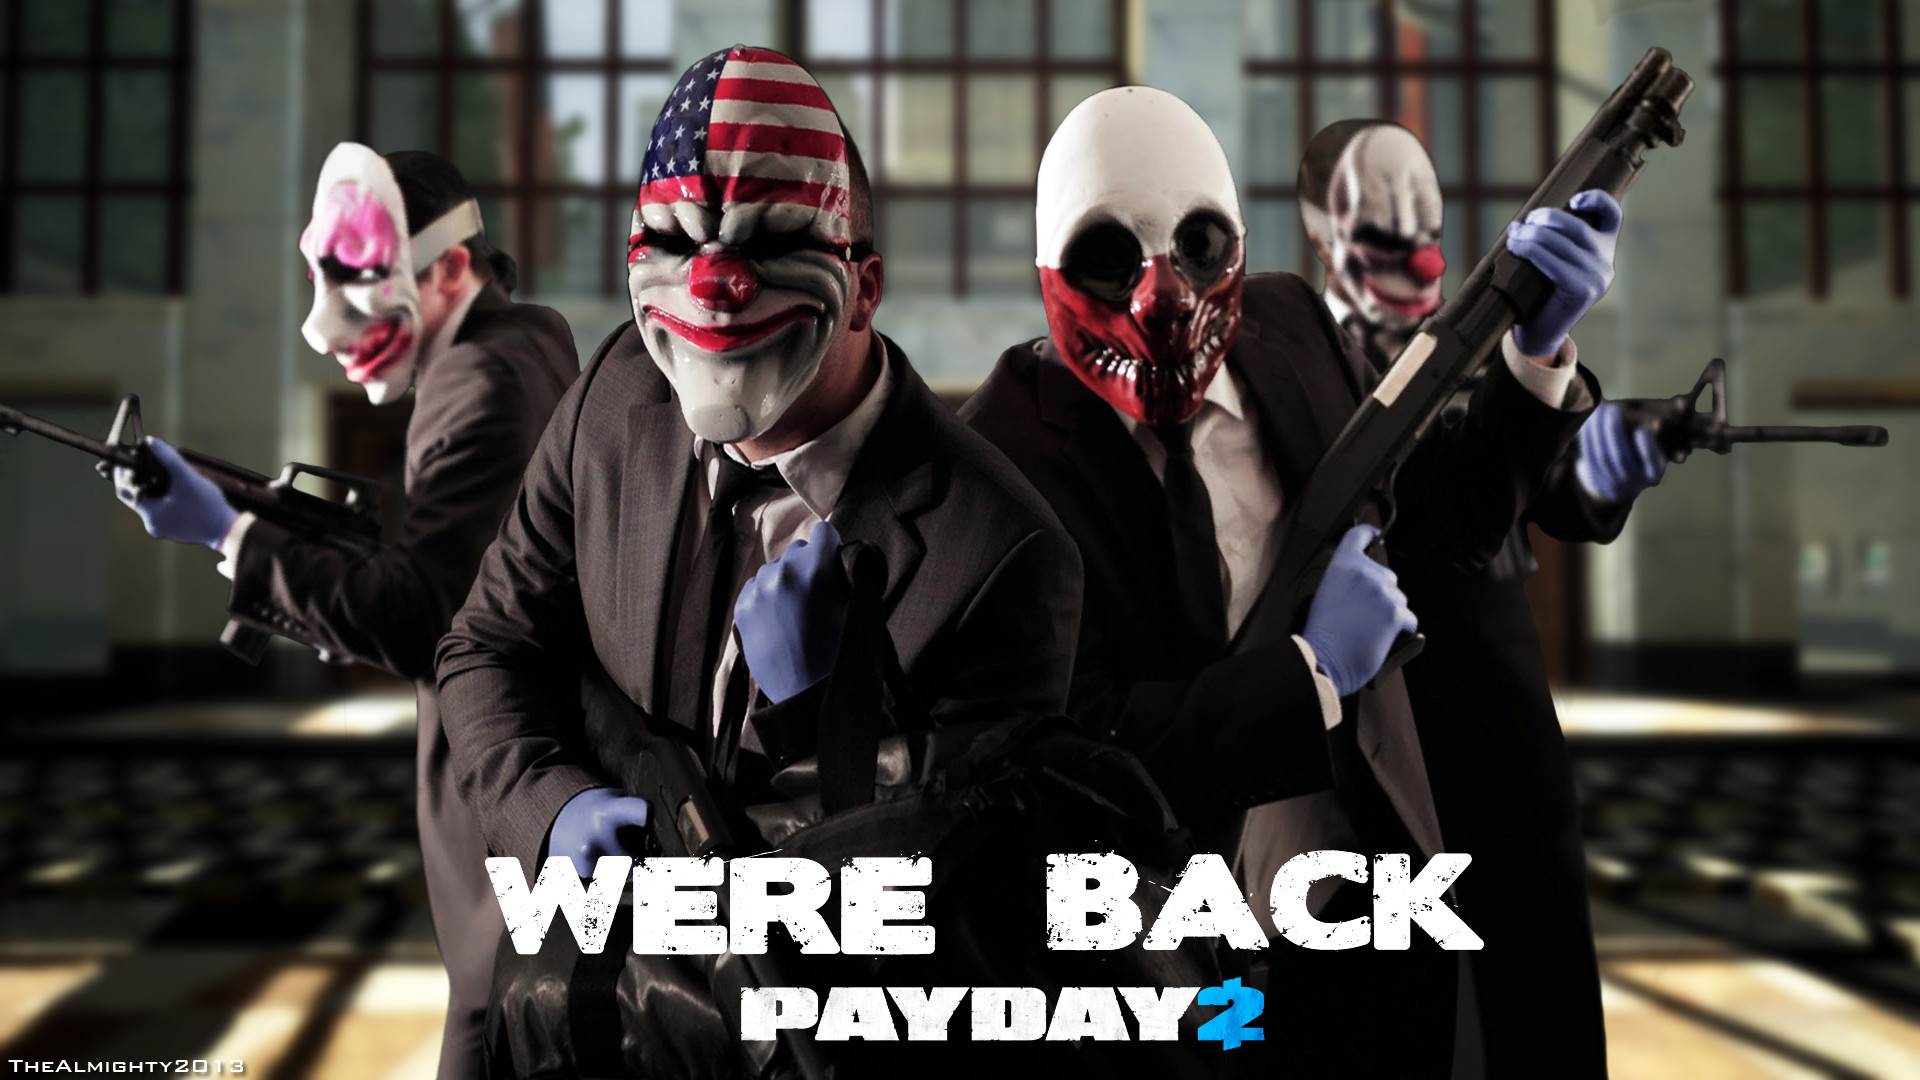 http://gamingbolt.com/wp-content/uploads/2013/07/payday-2-wallpapers.jpg